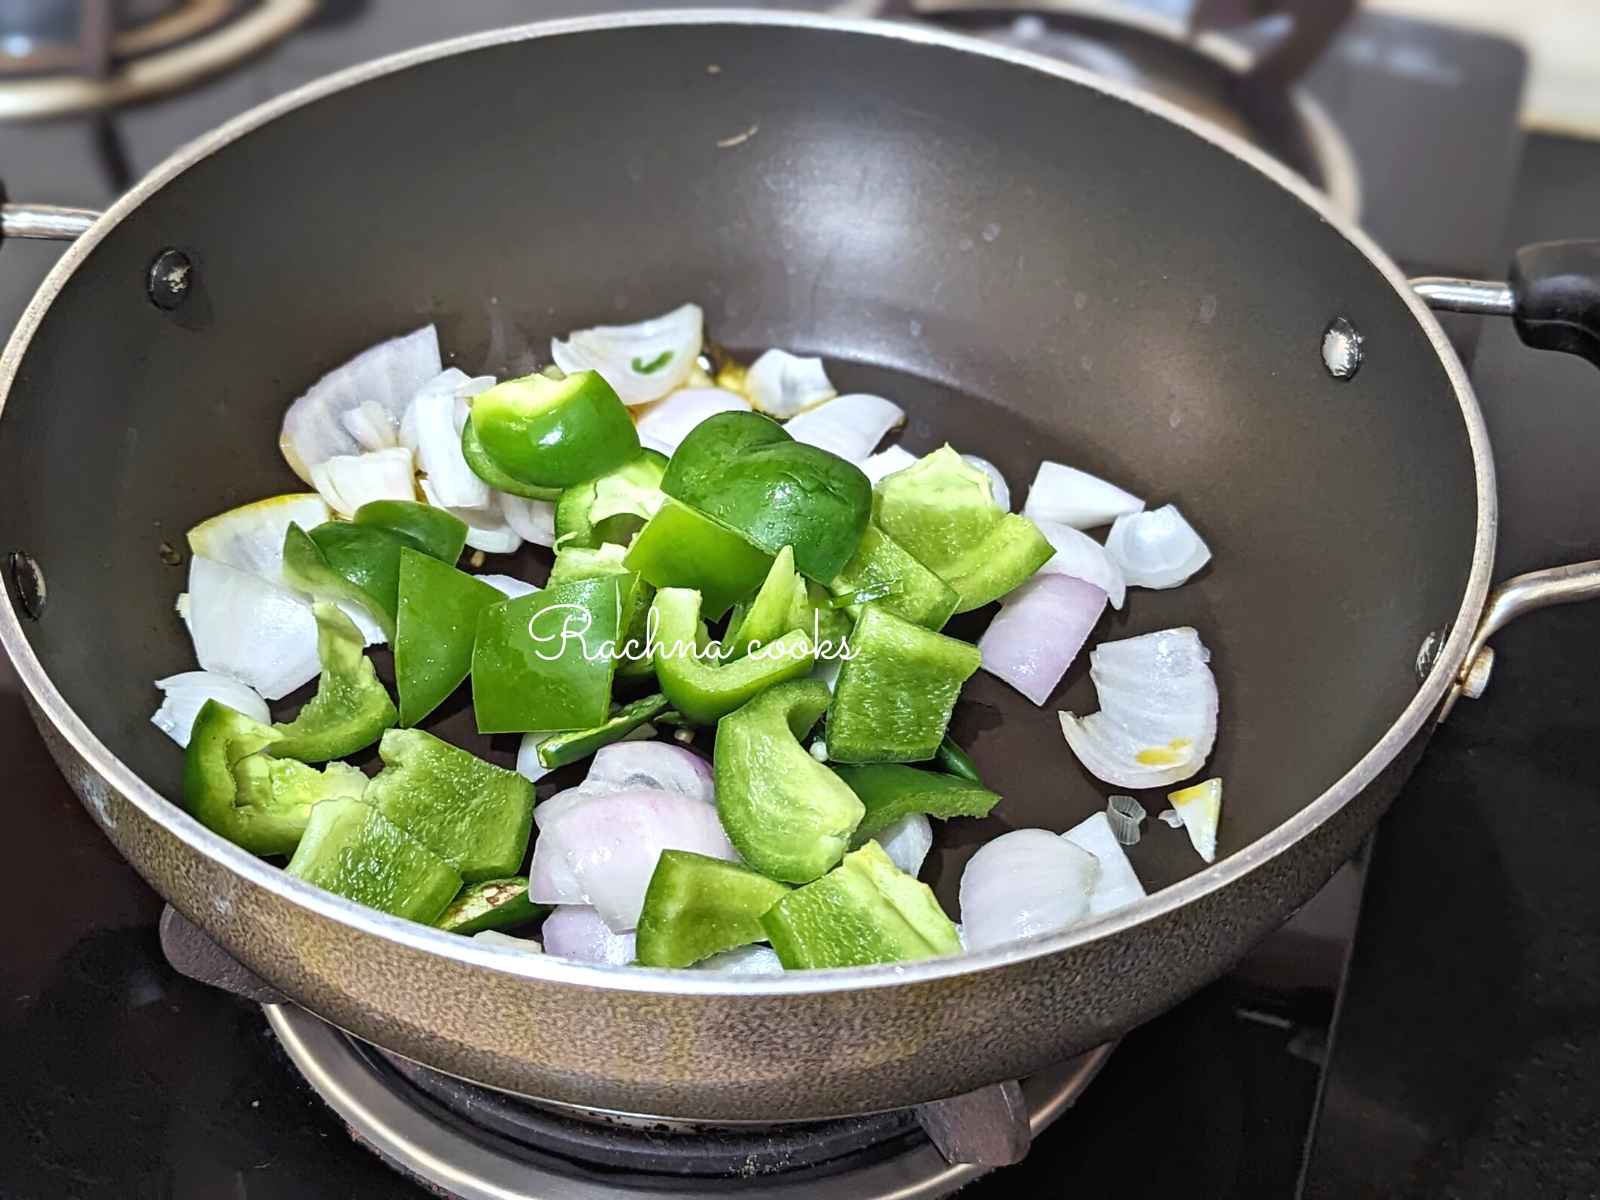 Onion and green pepper cubes sauteed in a pan.